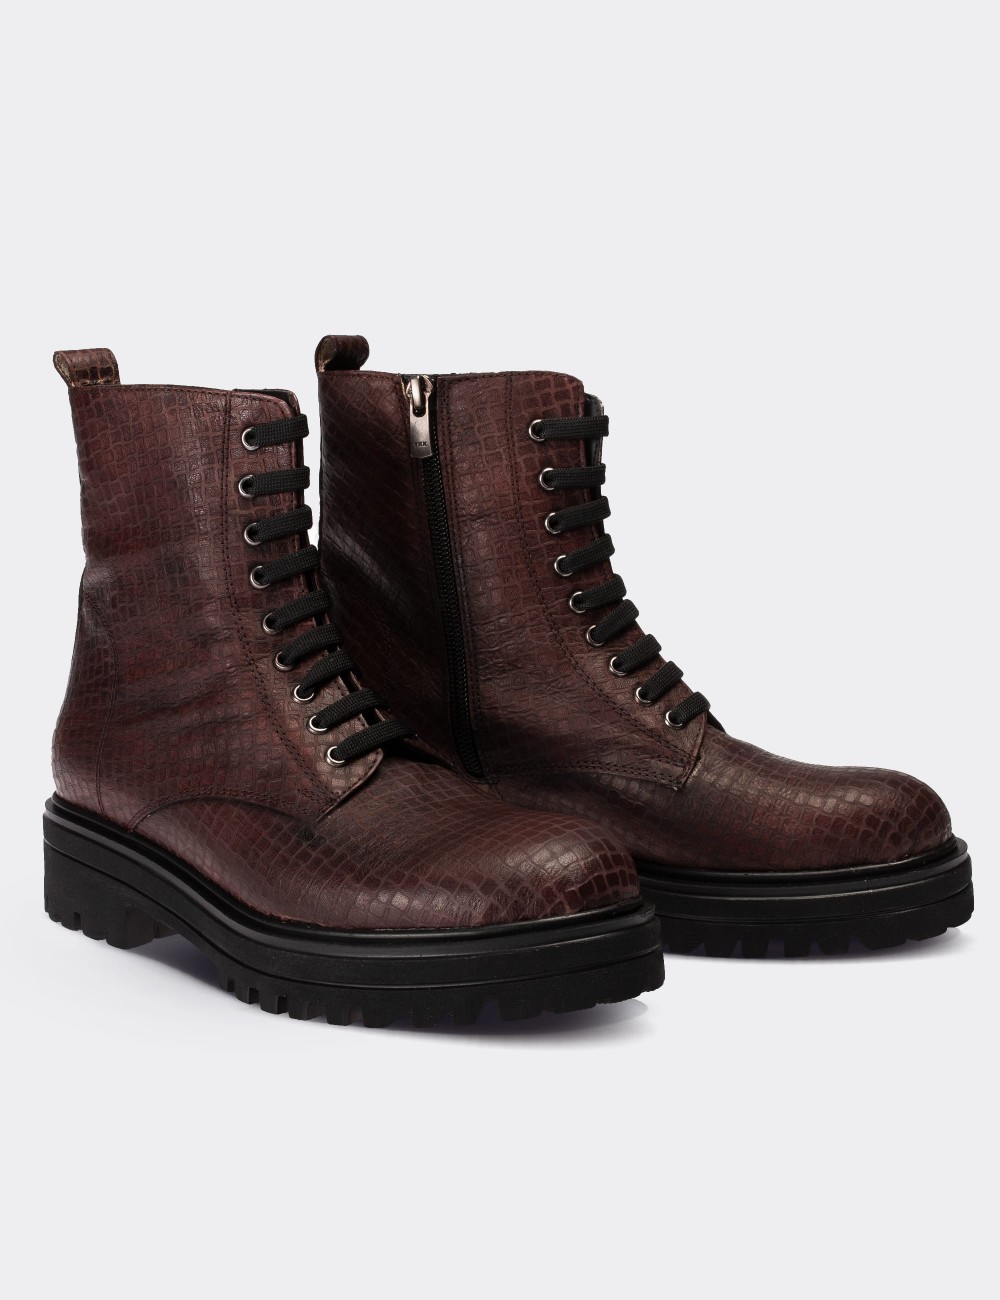 Brown  Leather Postal Boots - 01814ZKHVE17